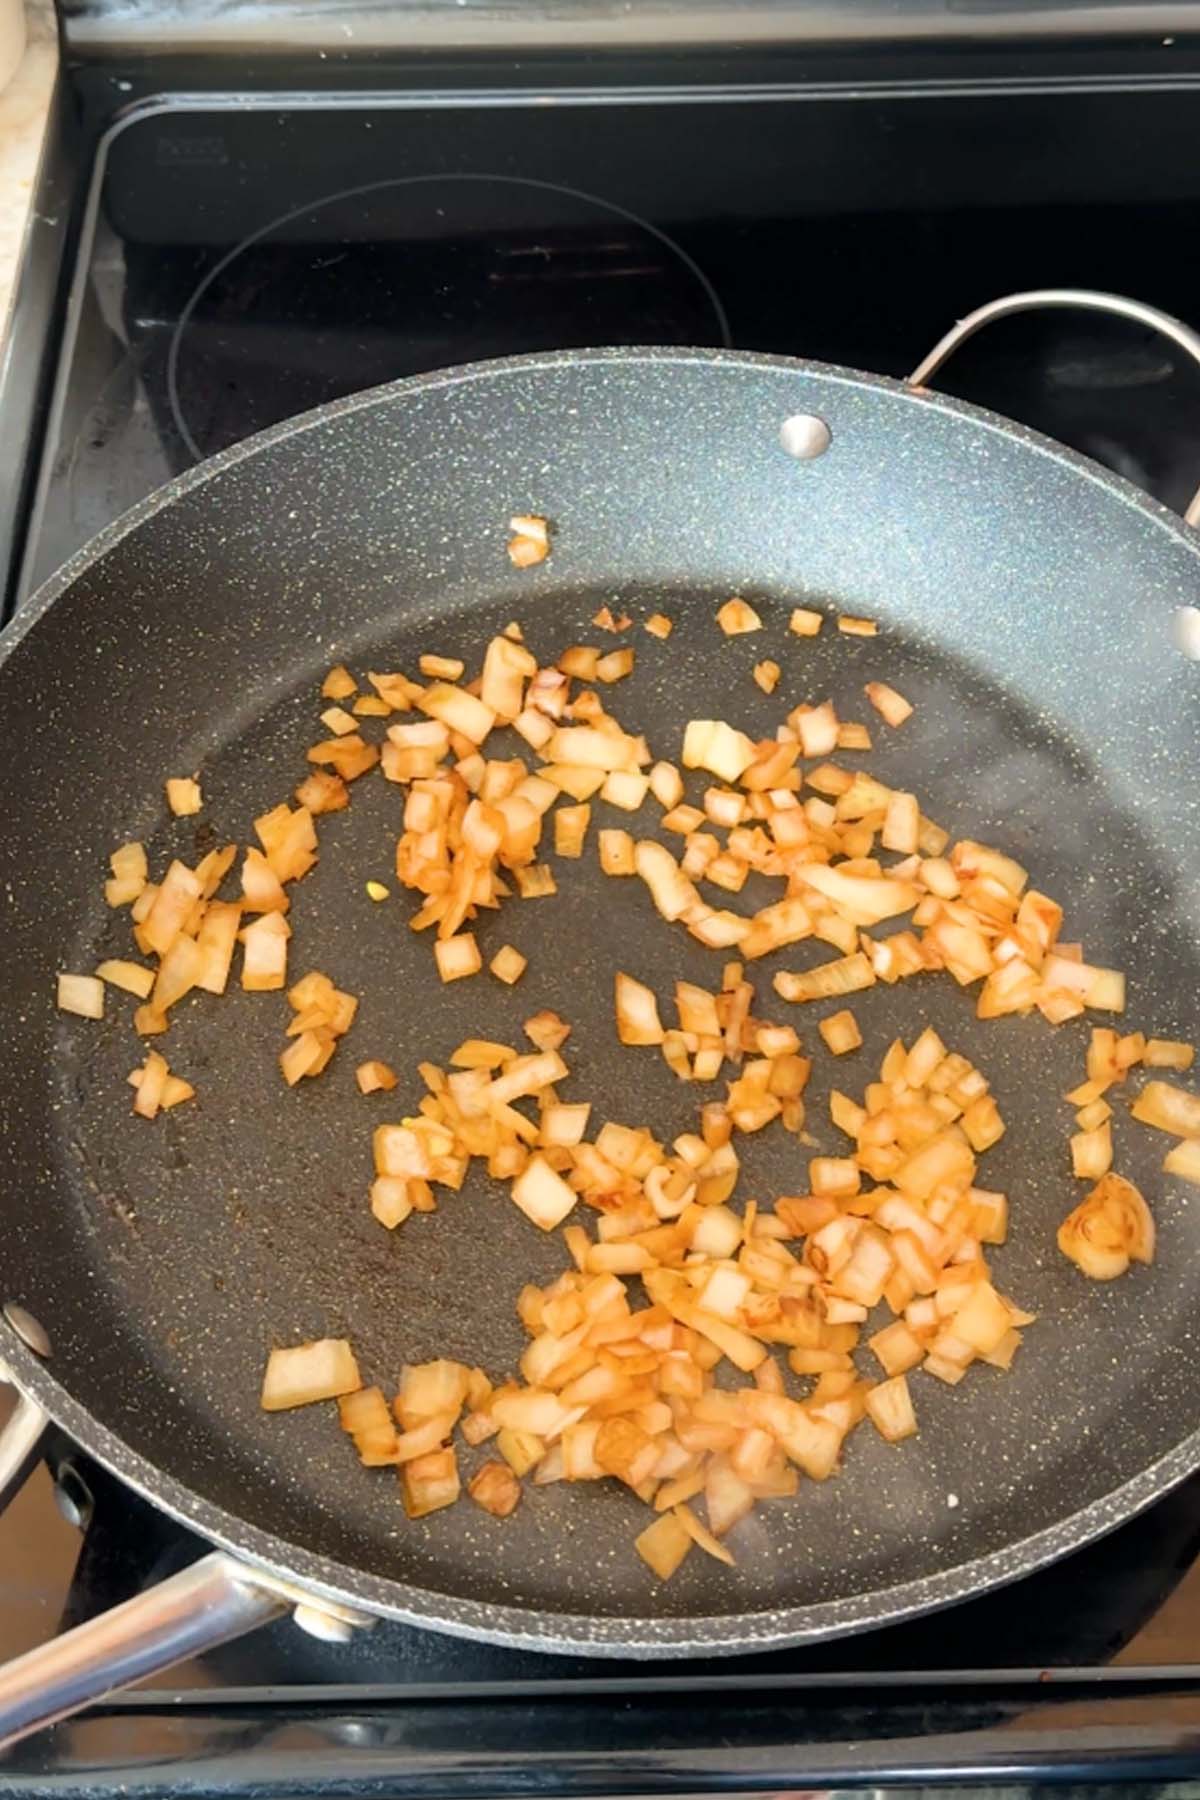 Fried onions in a skillet.